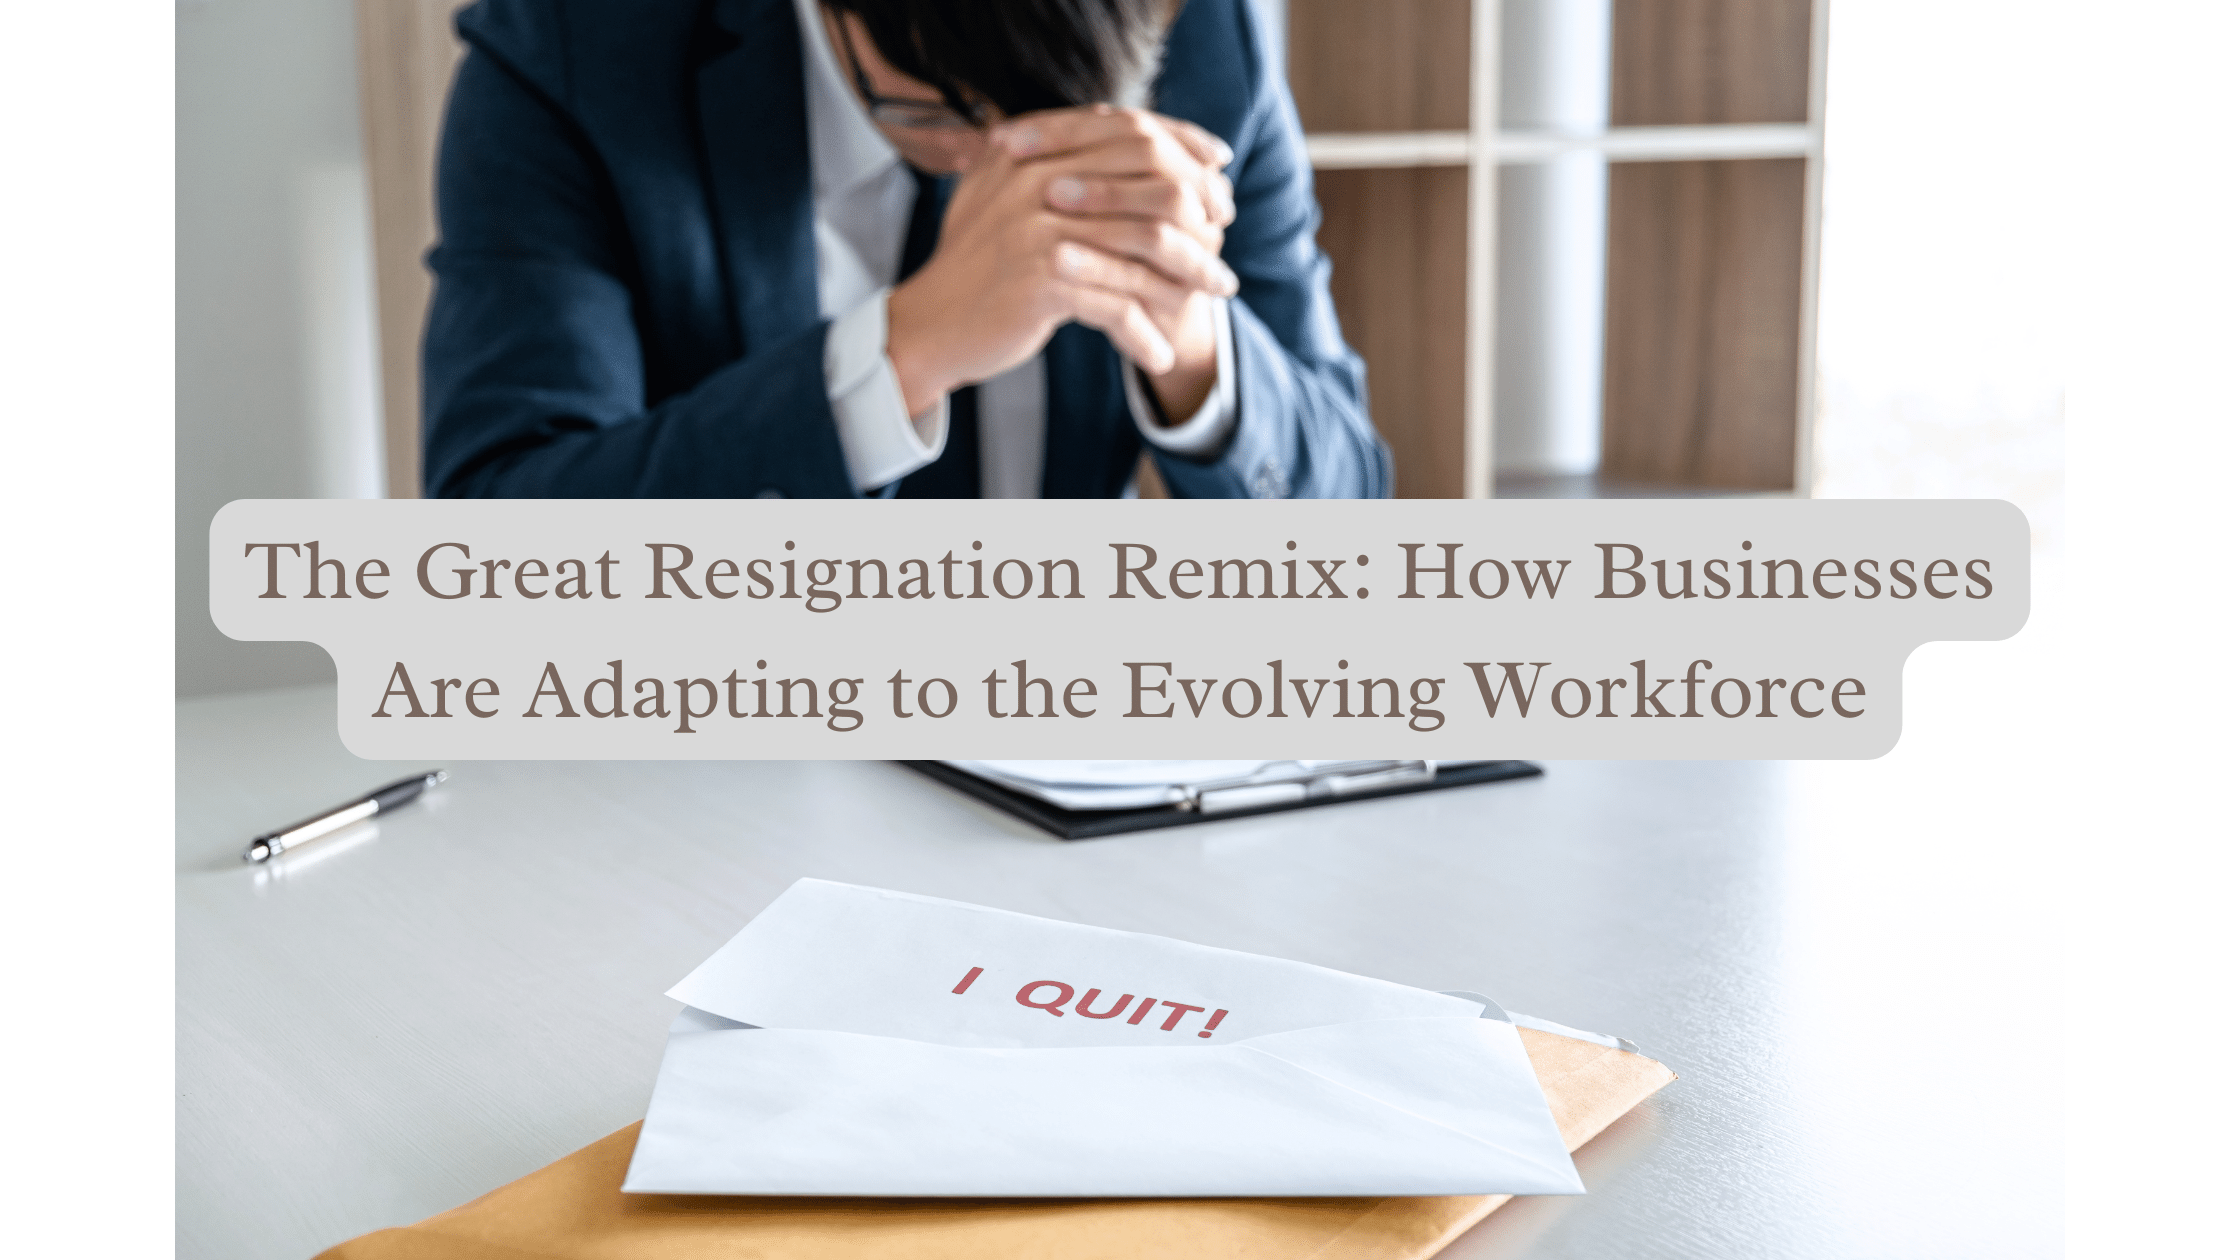 The Great Resignation Remix: How Businesses Are Adapting to the Evolving Workforce